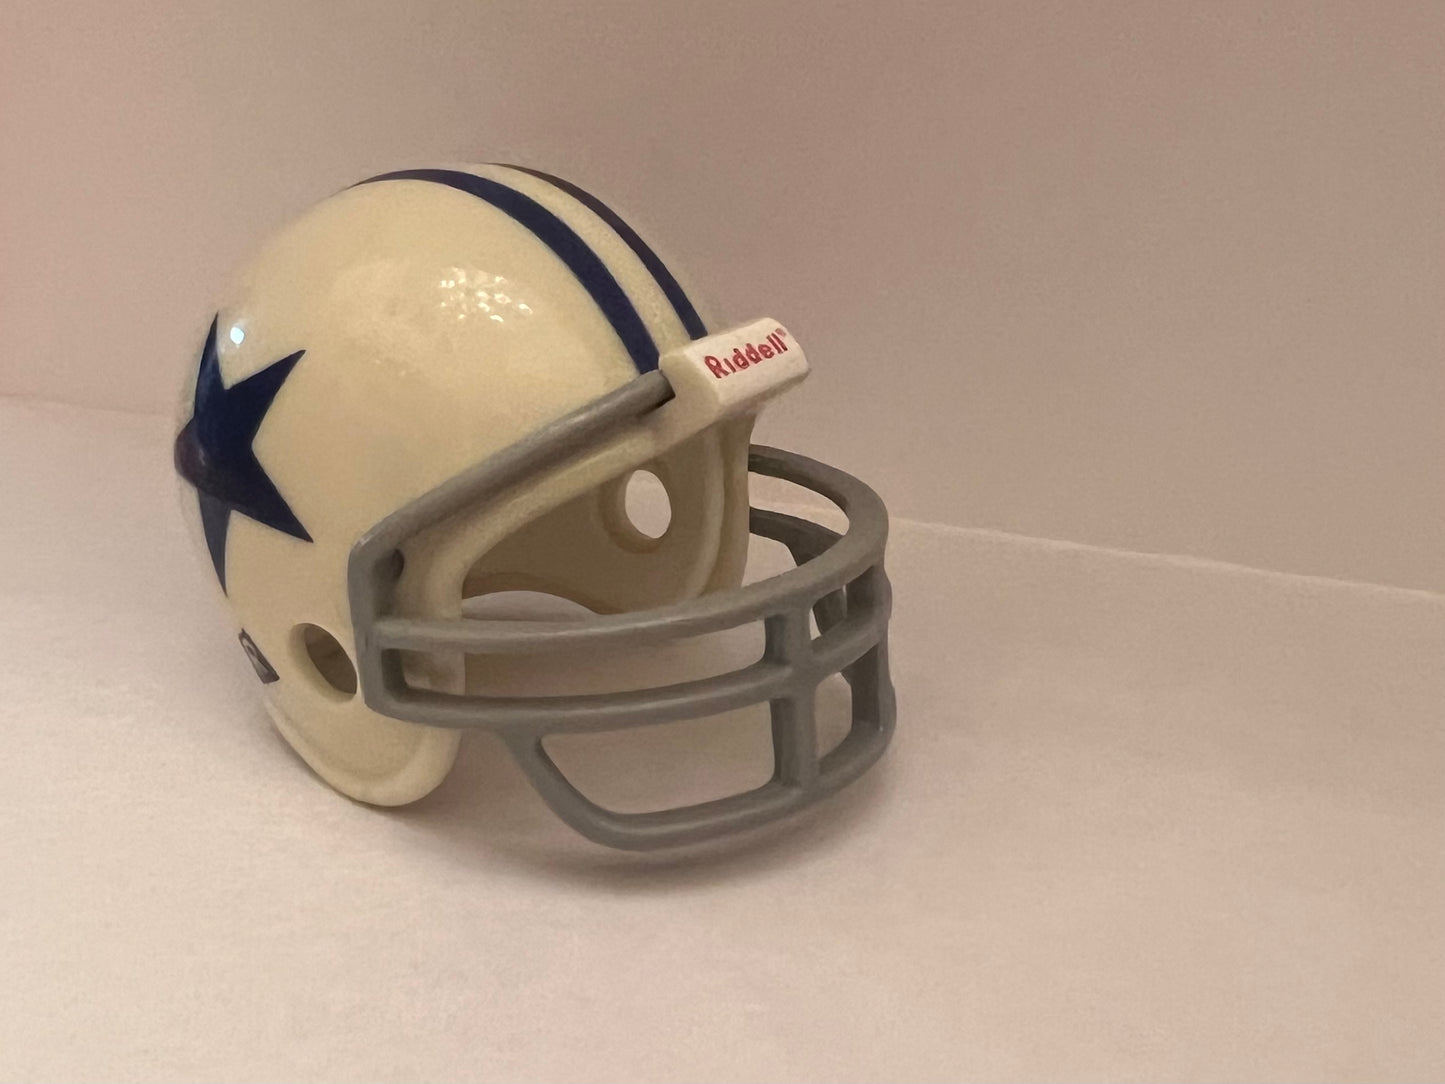 Dallas Cowboys Riddell NFL Pocket Pro Helmet 1960-1963 Throwback (White Helmet with Navy Star and stripes) from series I (1)  WESTBROOKSPORTSCARDS   